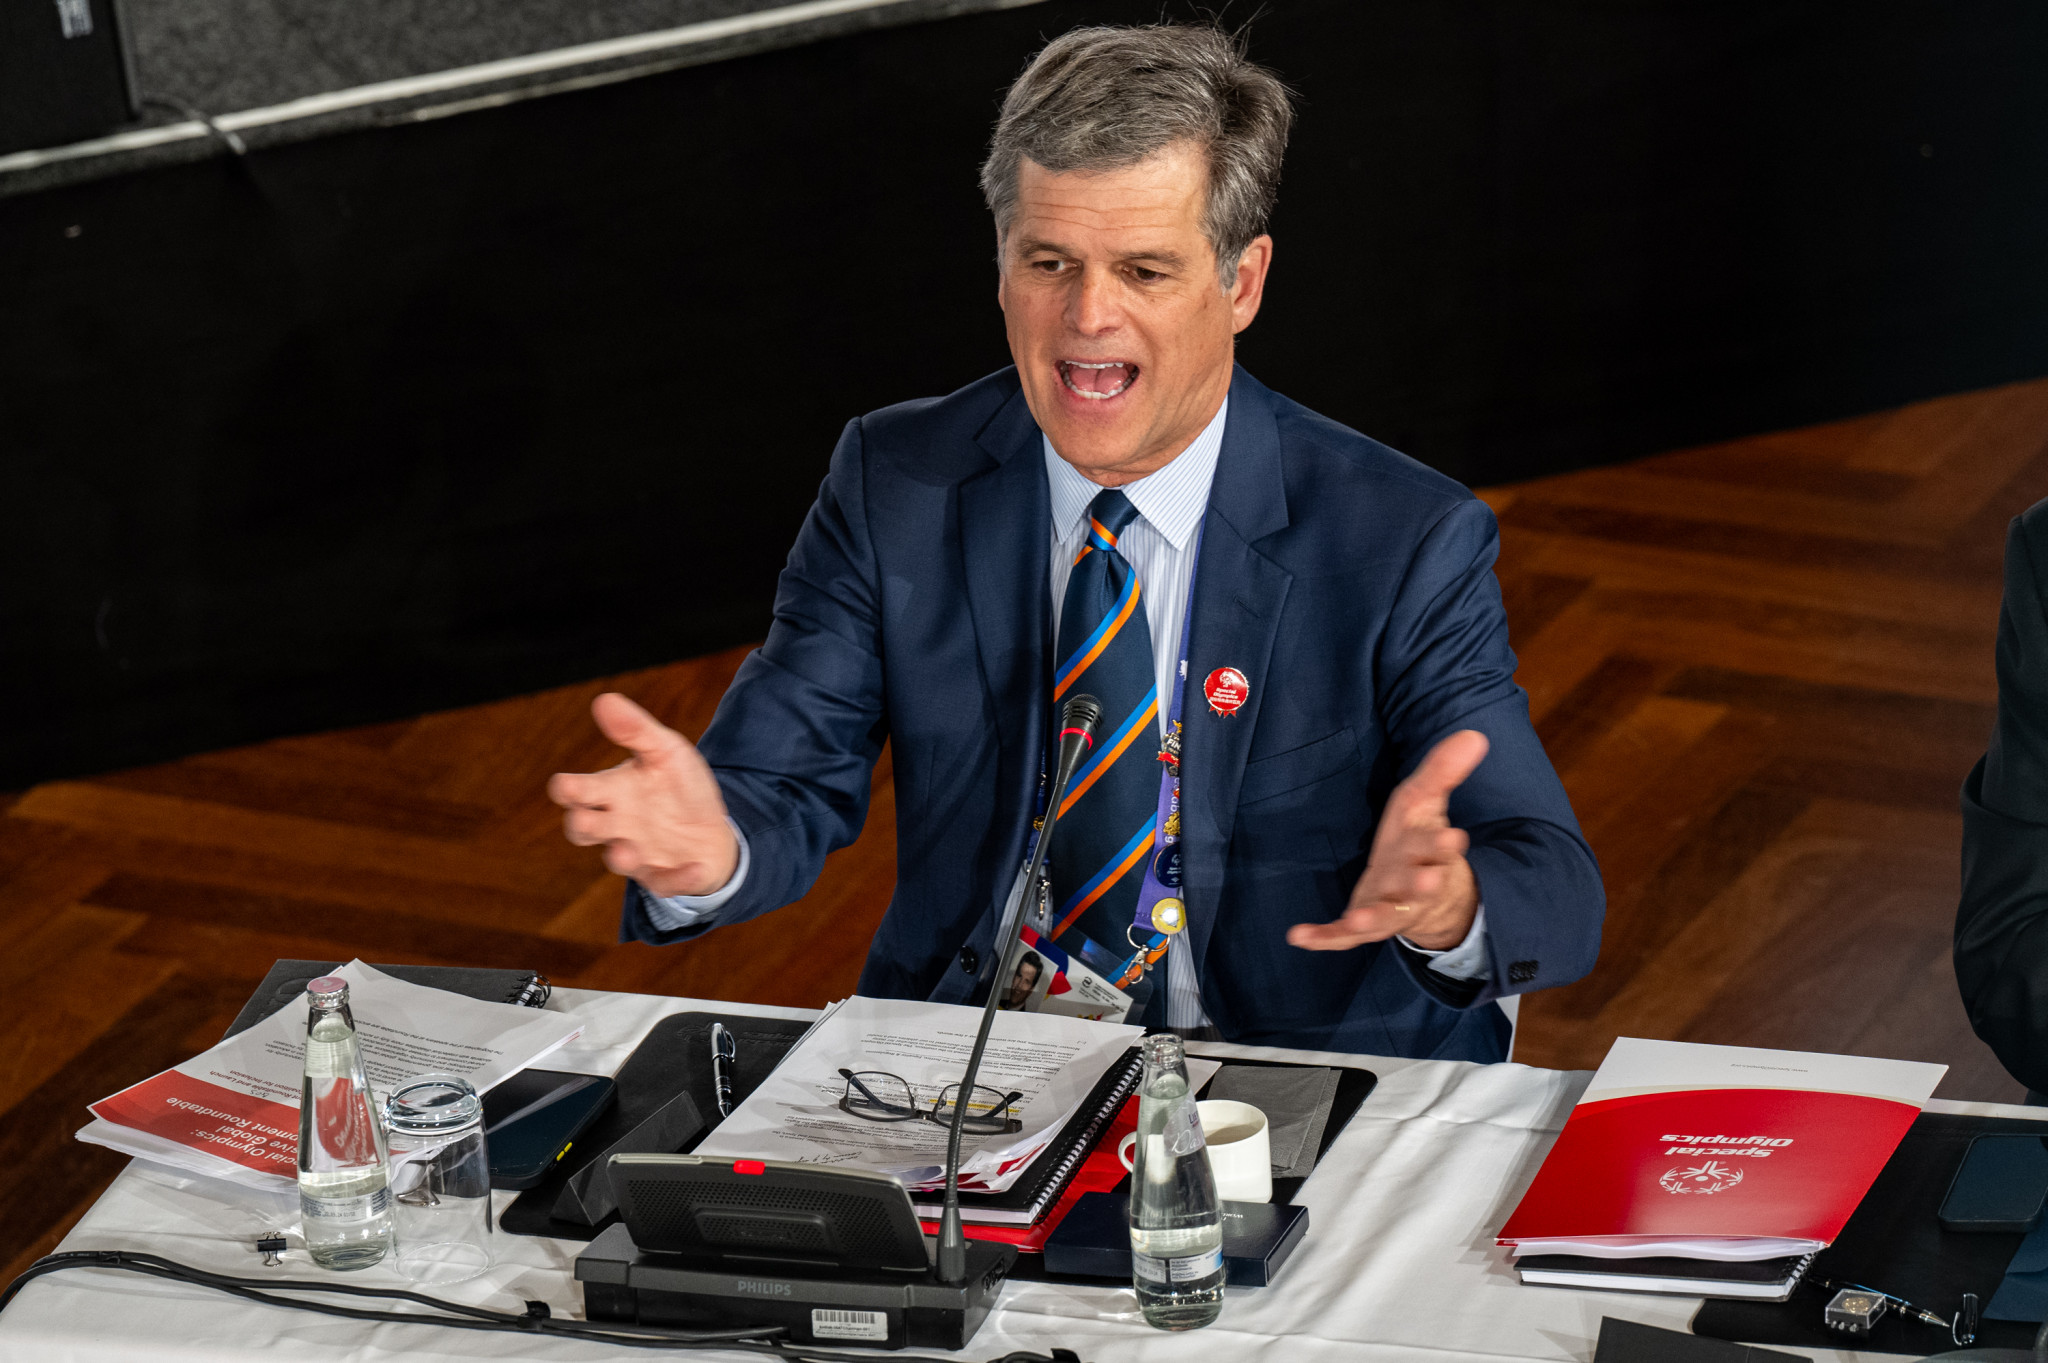 Special Olympics International chairman Timothy Shriver believes the event in Berlin will be remembered for 